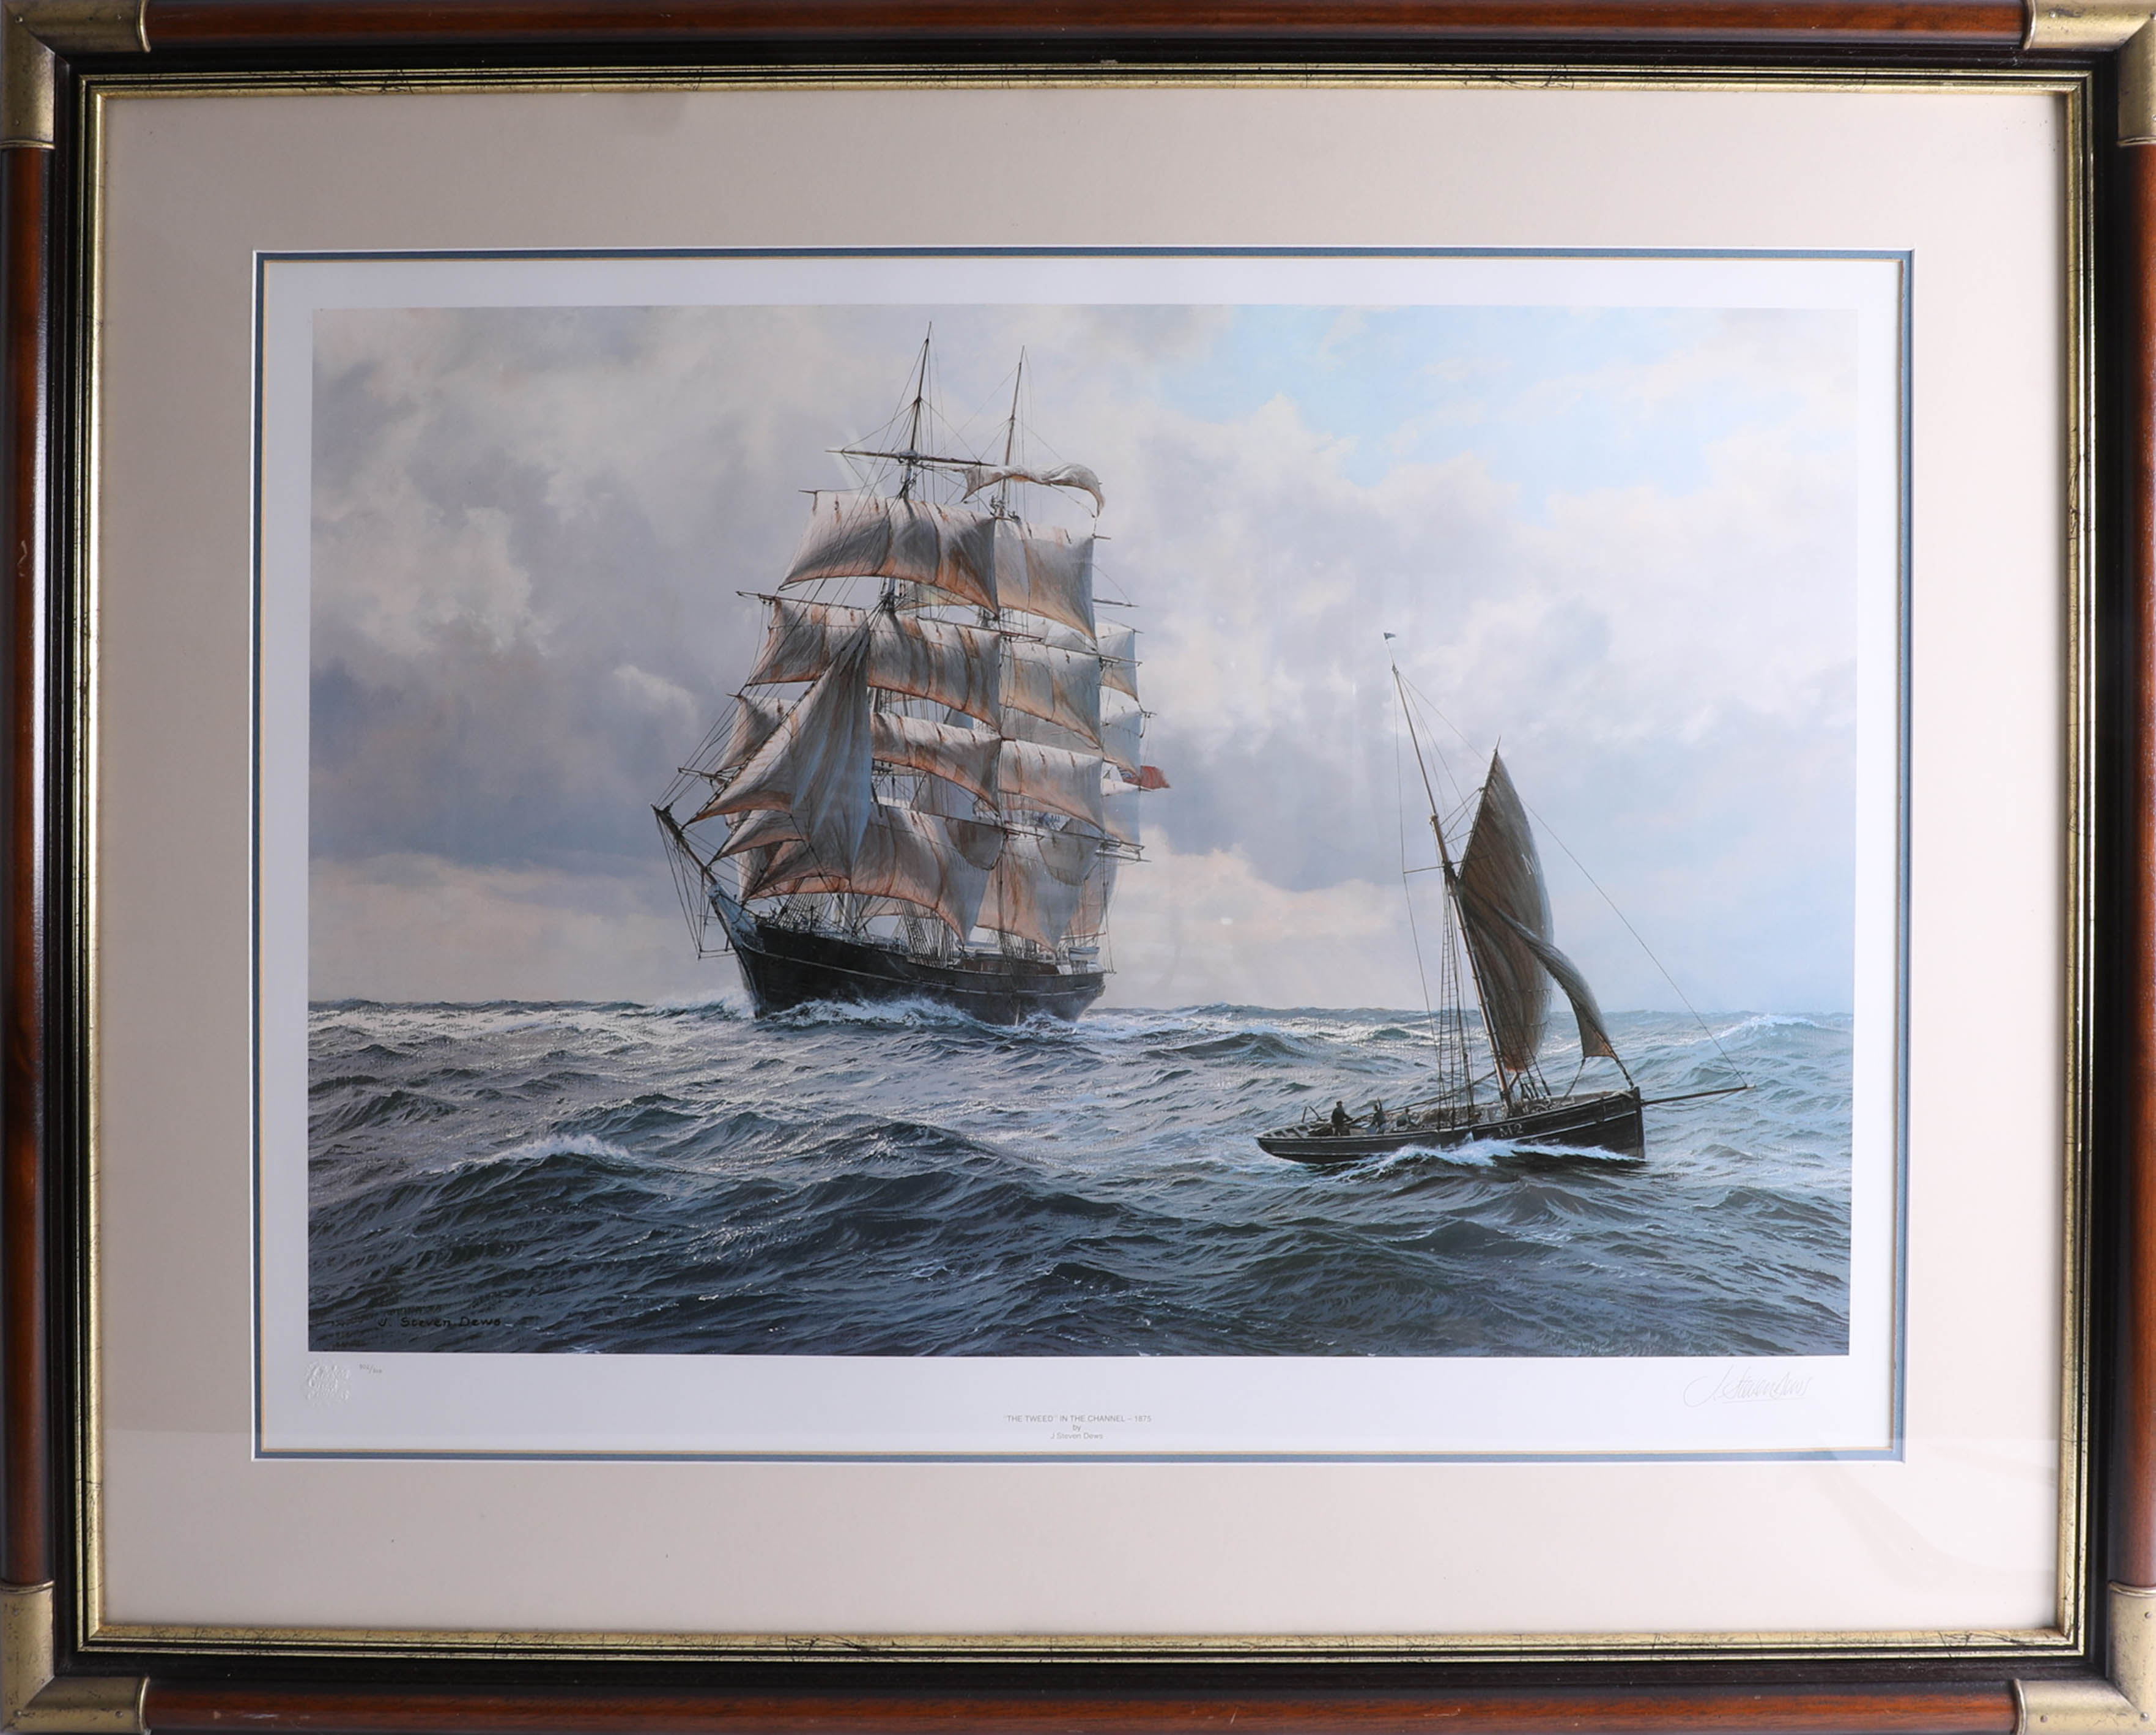 A collection of J.Steven Dews prints including 'Shamrock V racing off Yarmouth', 'The Whaler Phoenix - Image 3 of 5